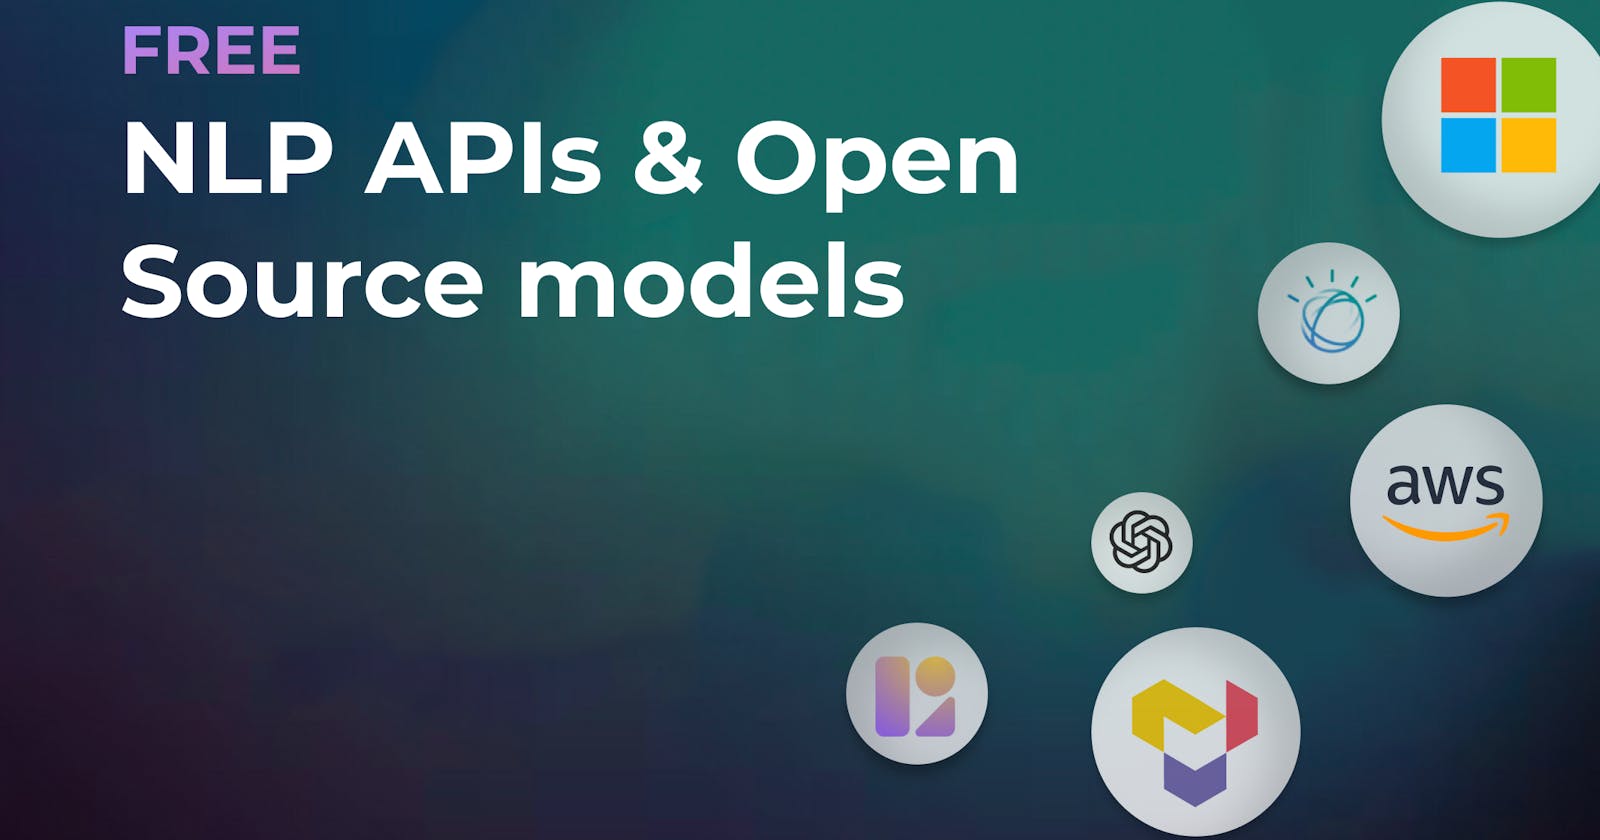 Top Free NLP tools, APIs, and Open Source models